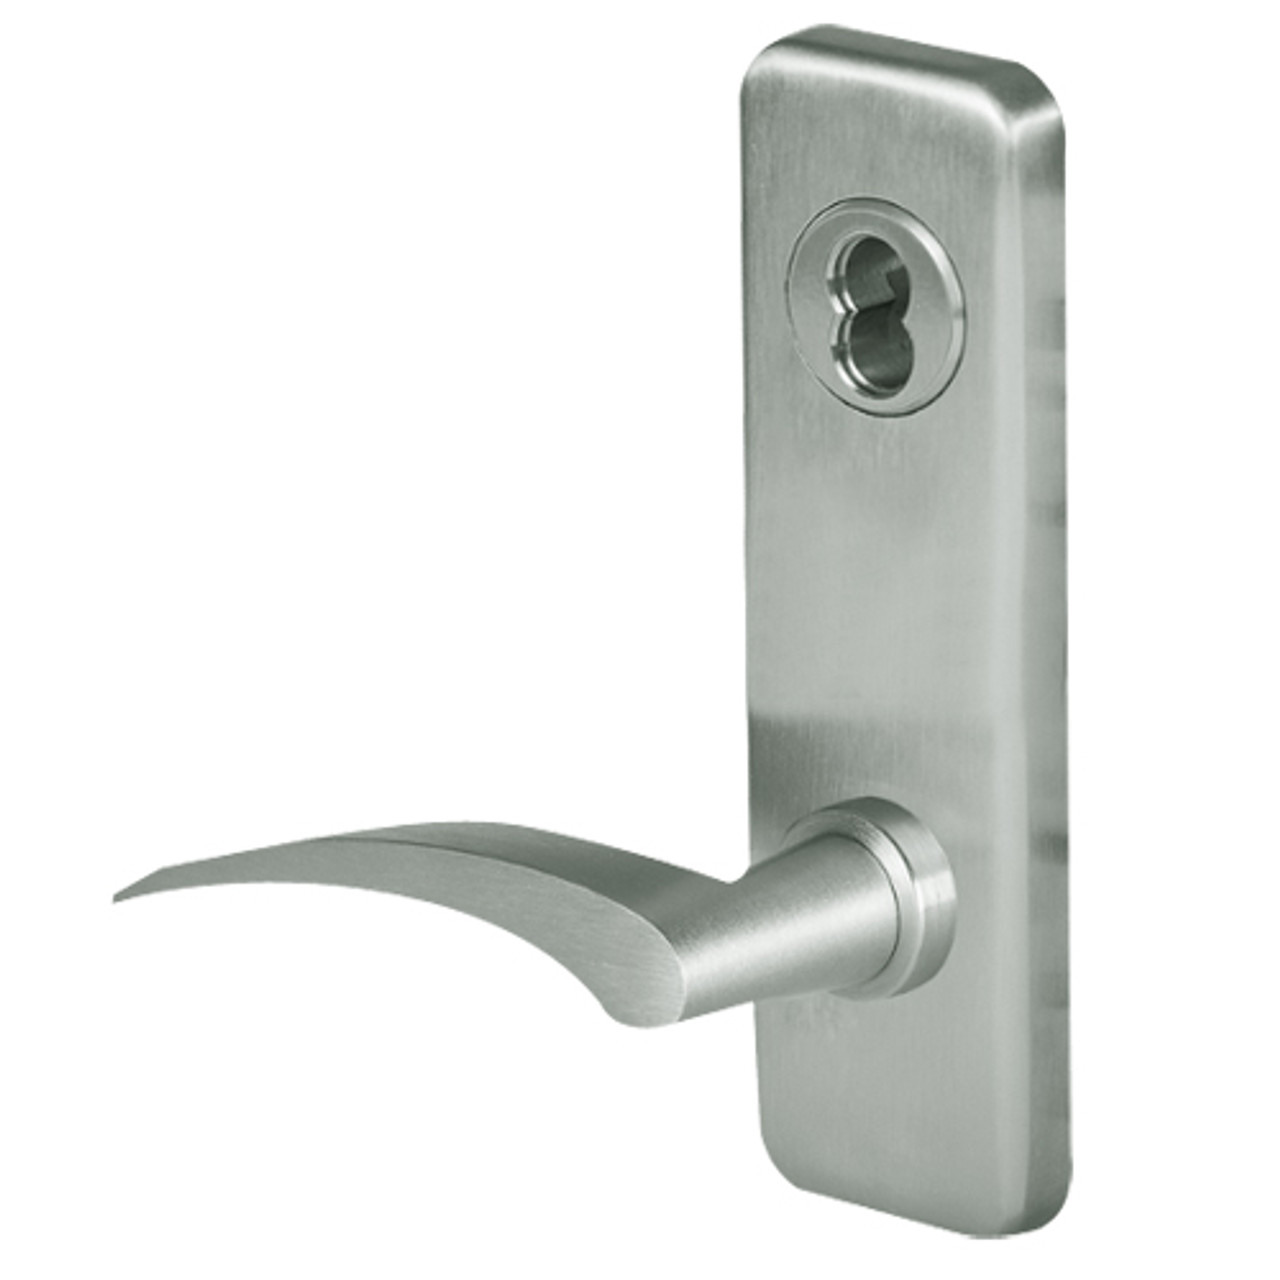 45H0L17LJ619 Best 40H Series Privacy with Deadbolt Heavy Duty Mortise Lever Lock with Gull Wing LH in Satin Nickel